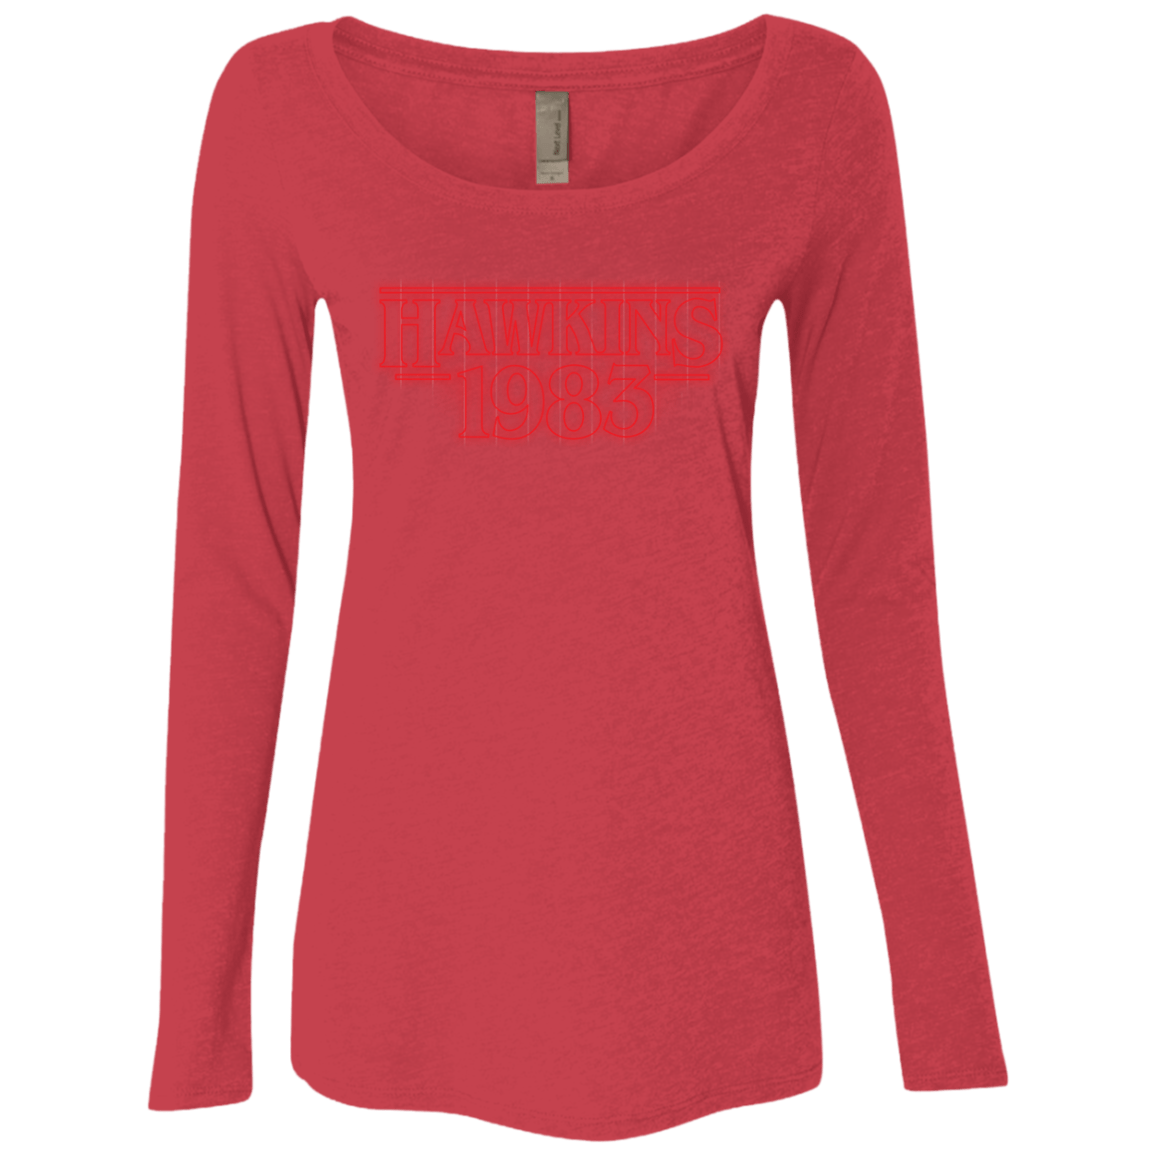 T-Shirts Vintage Red / Small Hawkins 83 Women's Triblend Long Sleeve Shirt